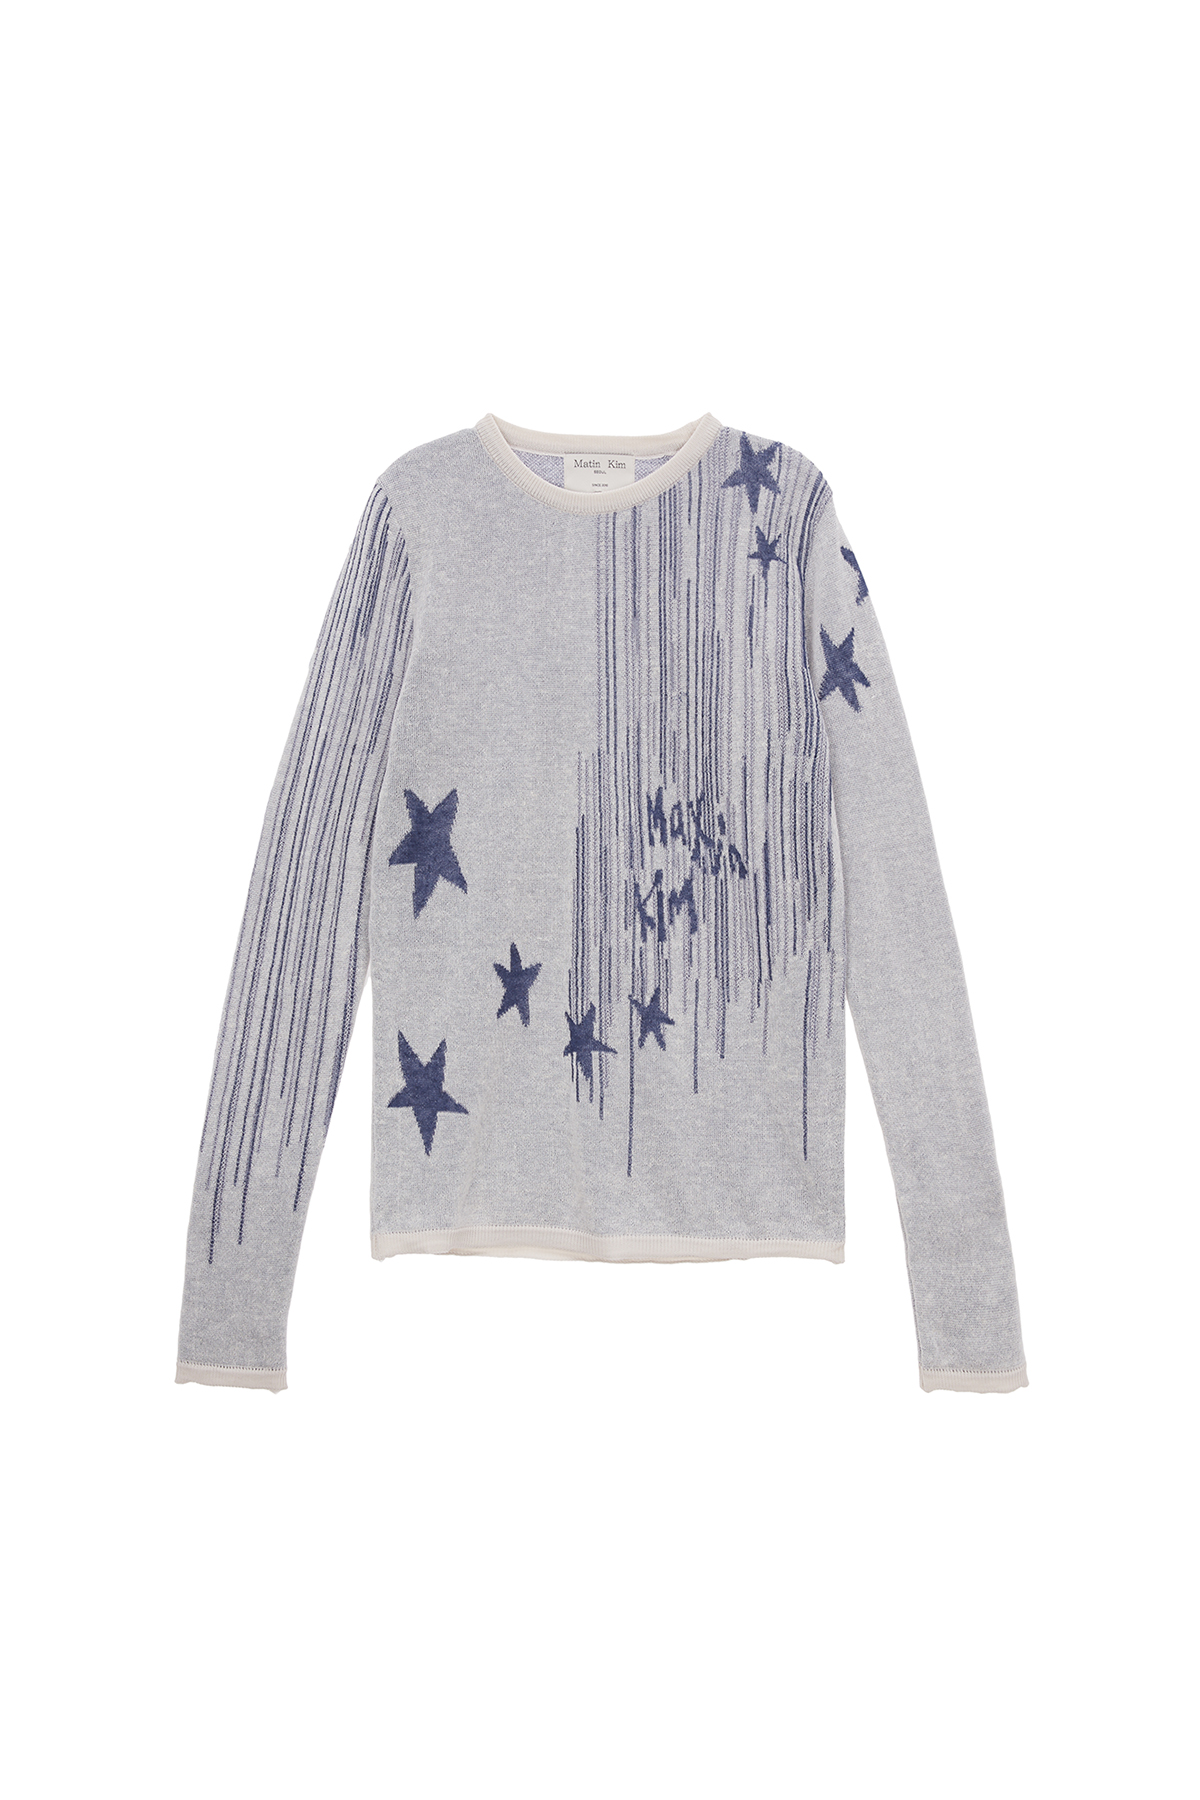 MILKY WAY JACQUARD KNIT TOP IN IVORY